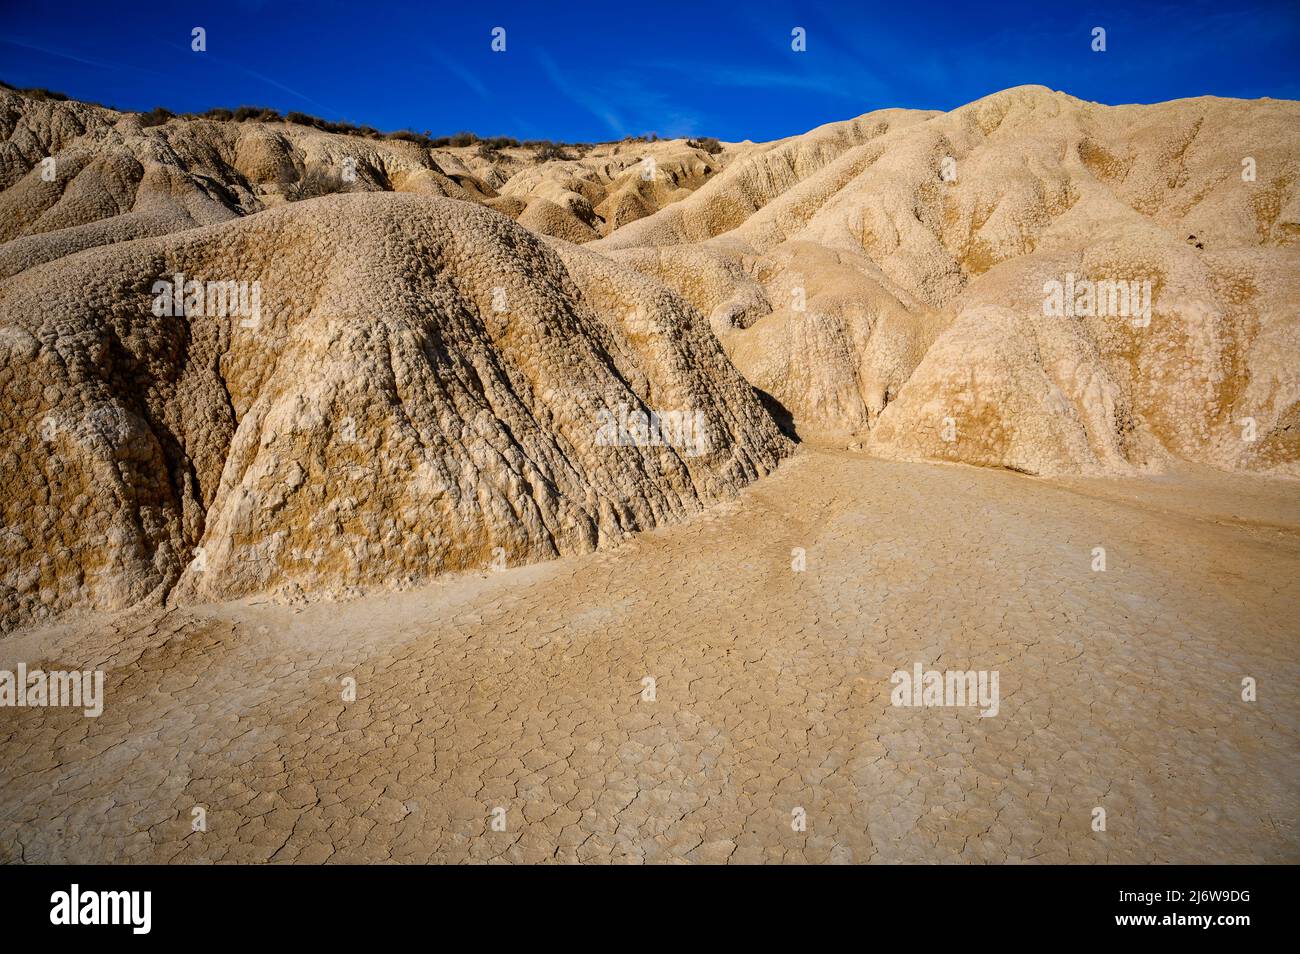 Dried and cracked mud in desert landscape, Bardenas reales national park, Navarro, Spain. Stock Photo